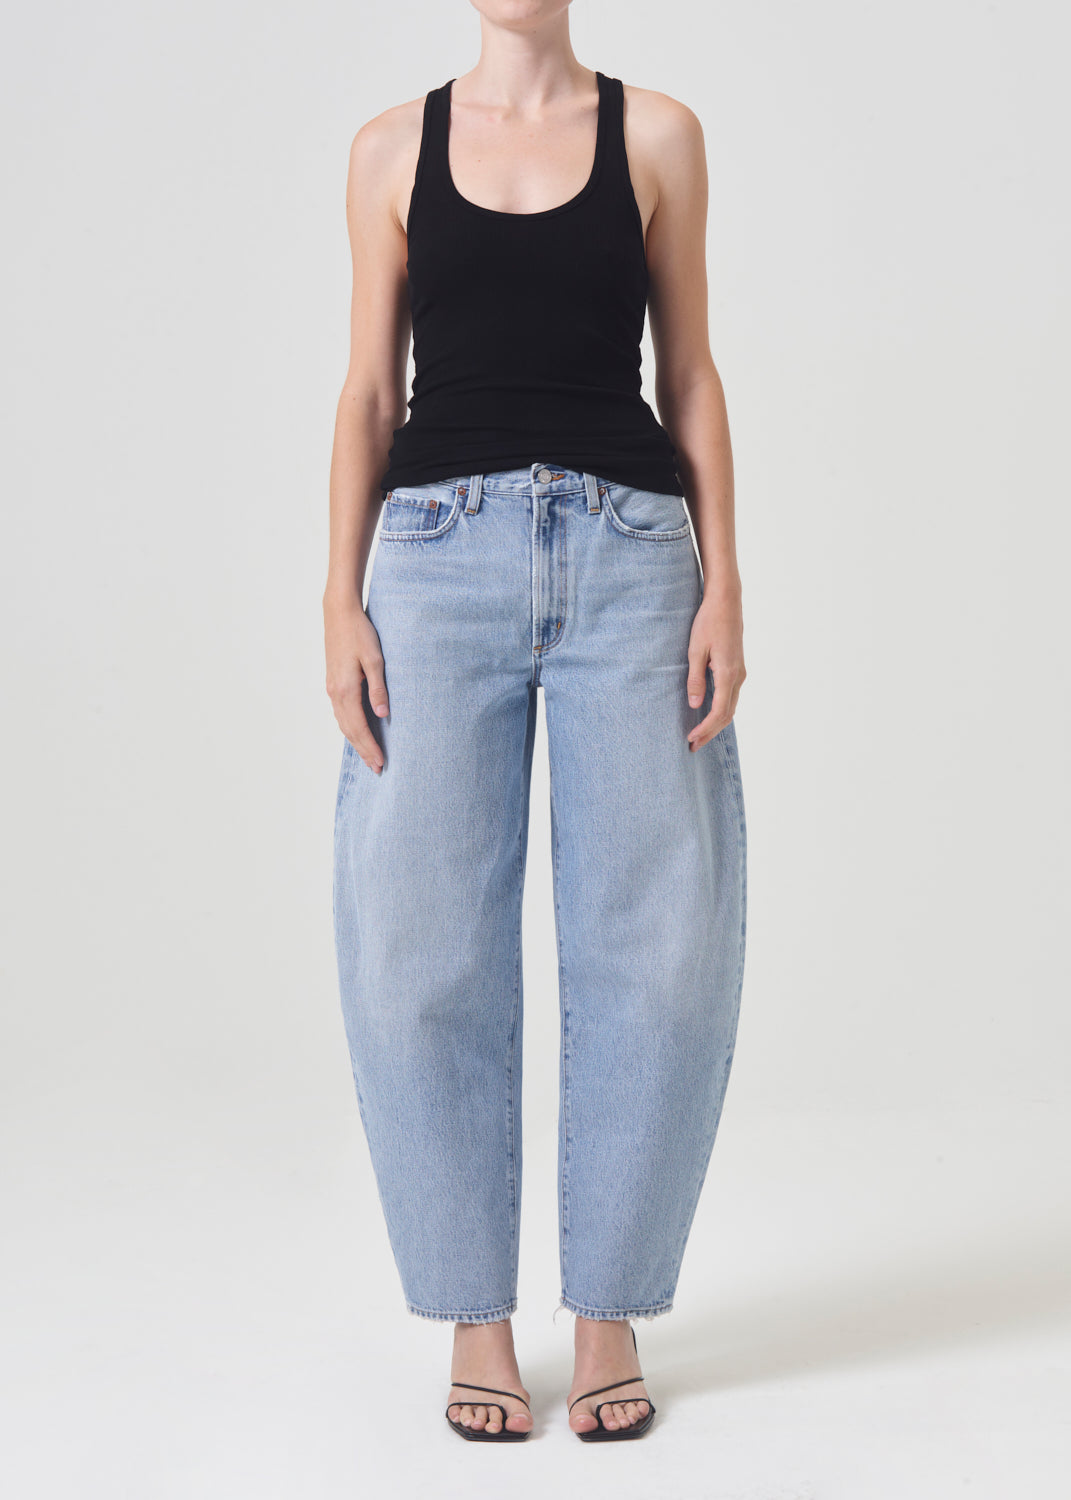 The Agolde Balloon Ultra High Rise Curved Jean in Conflict available at The New Trend Australia